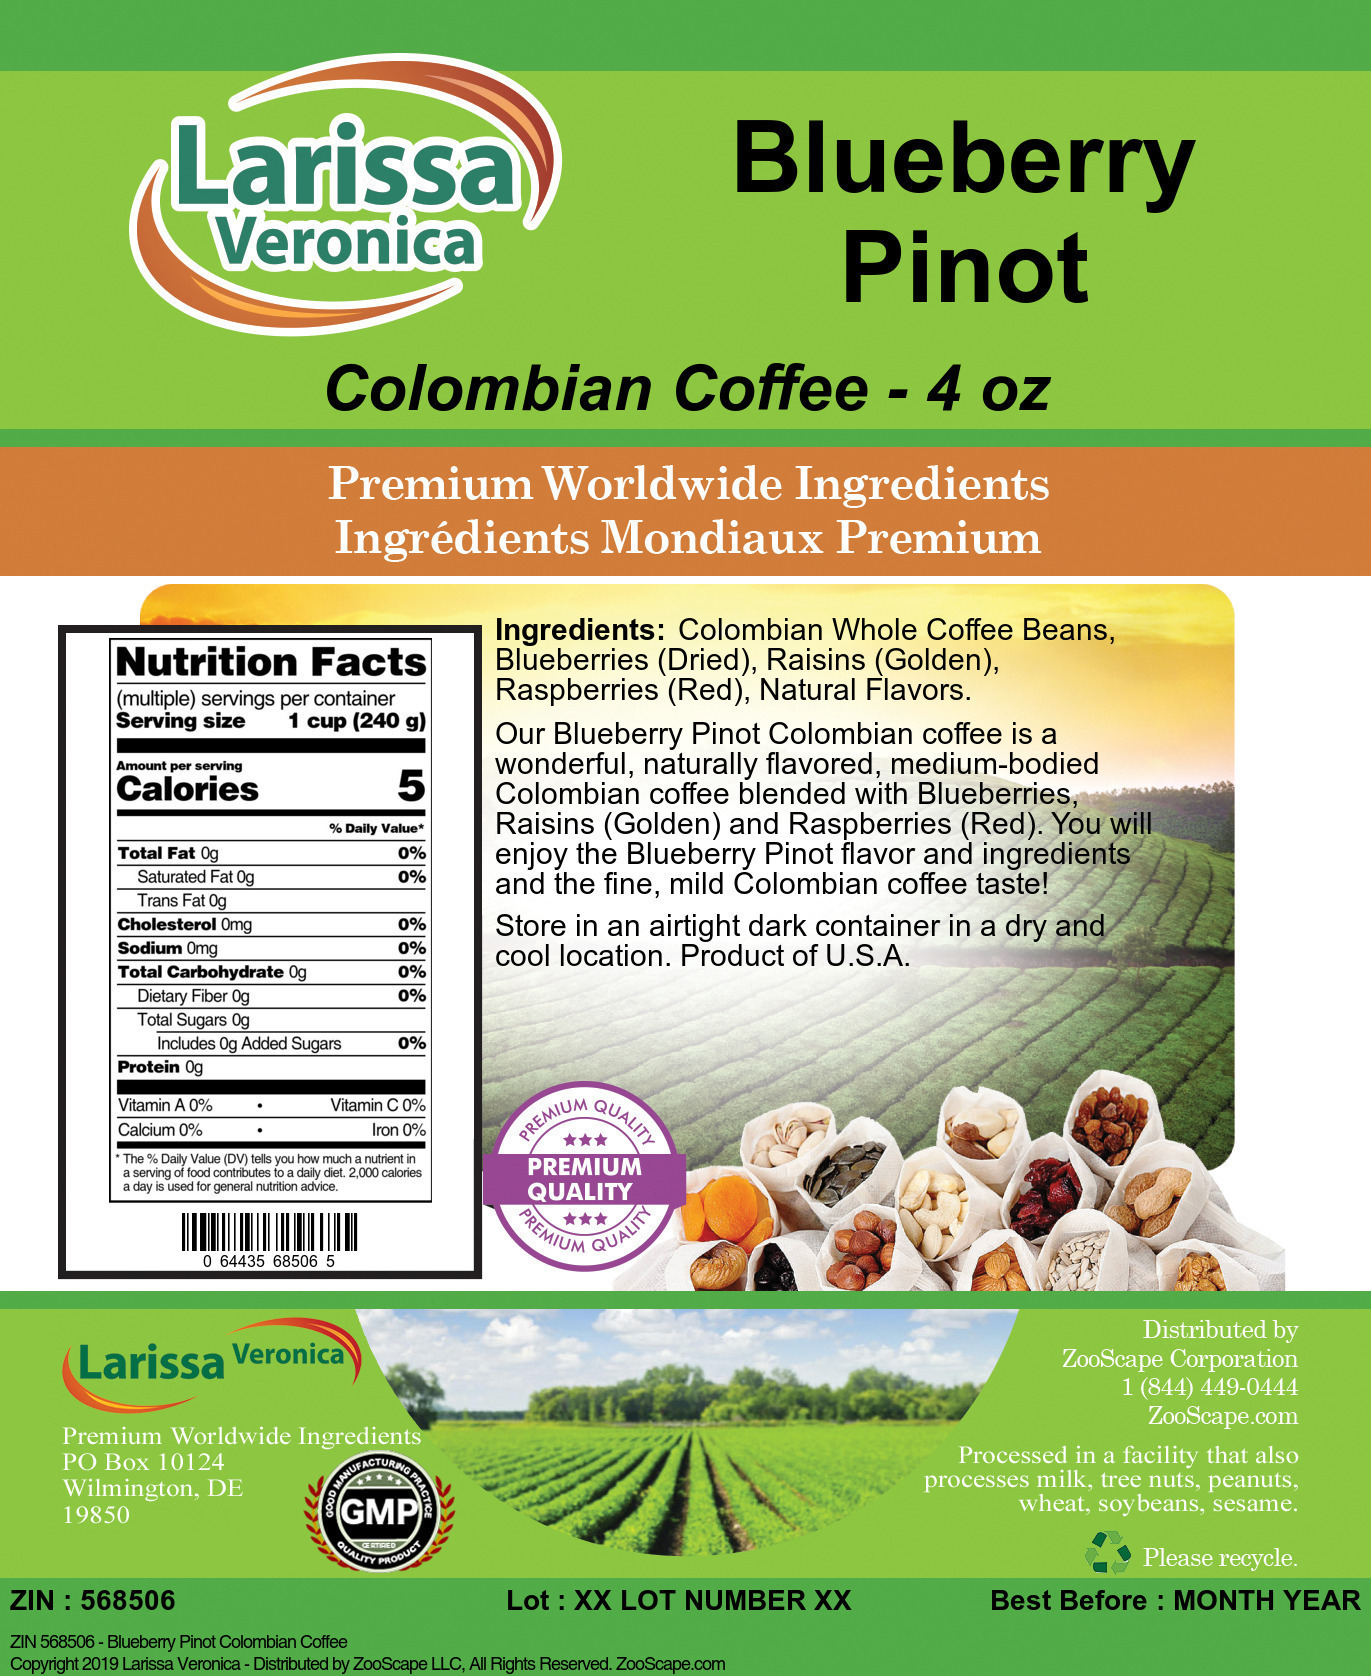 Blueberry Pinot Colombian Coffee - Label